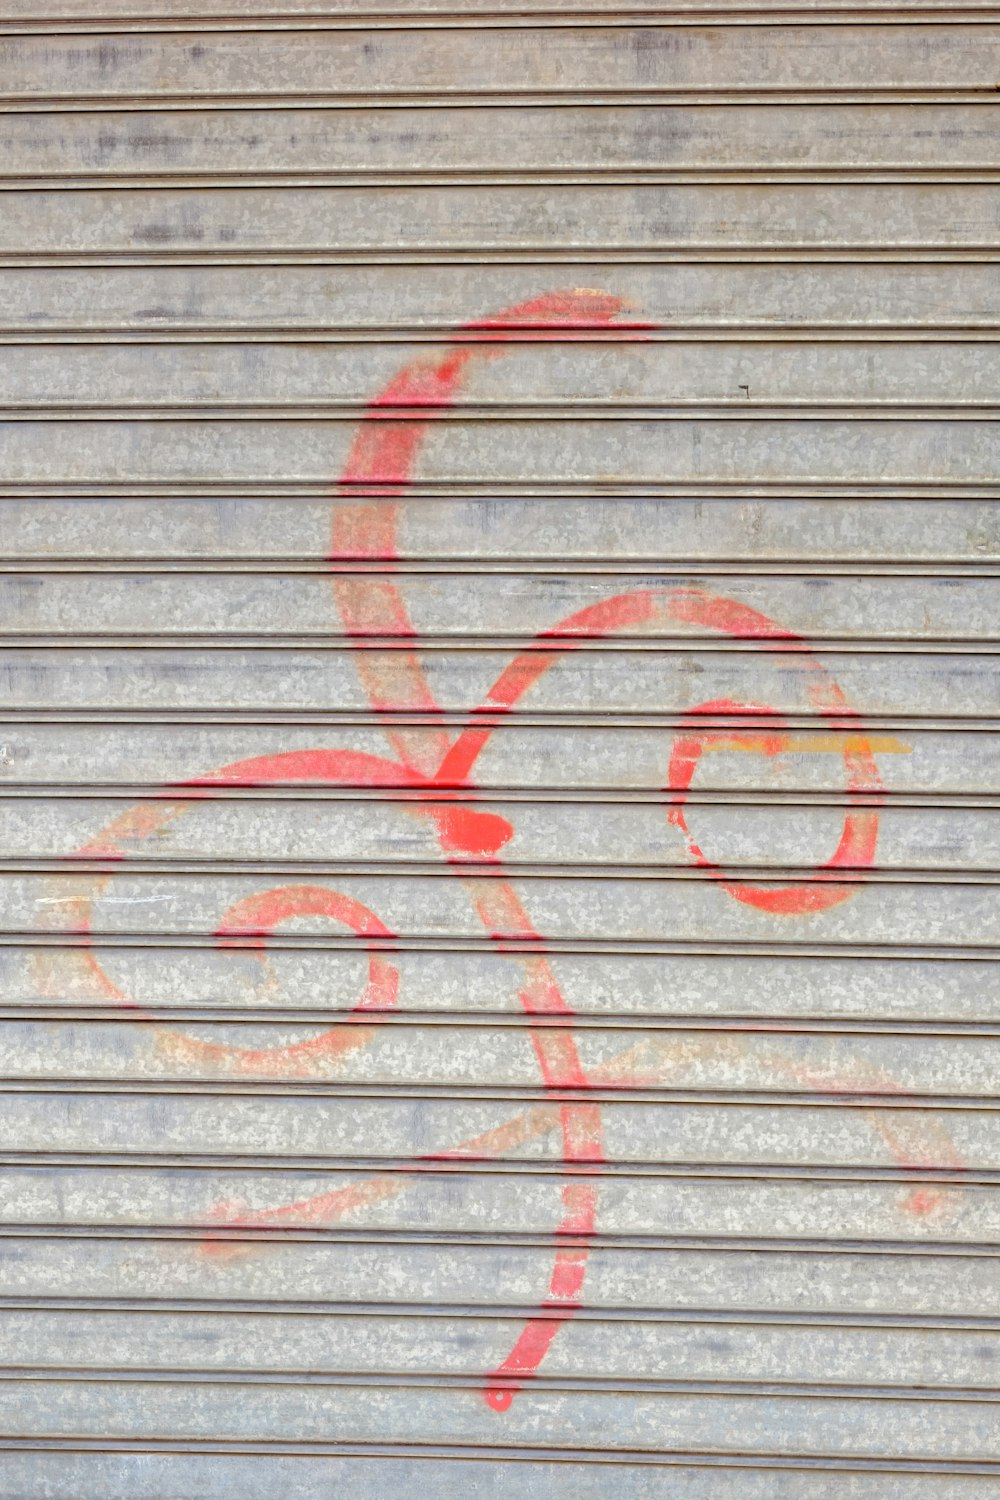 graffiti on a garage door with a red octopus drawn on it